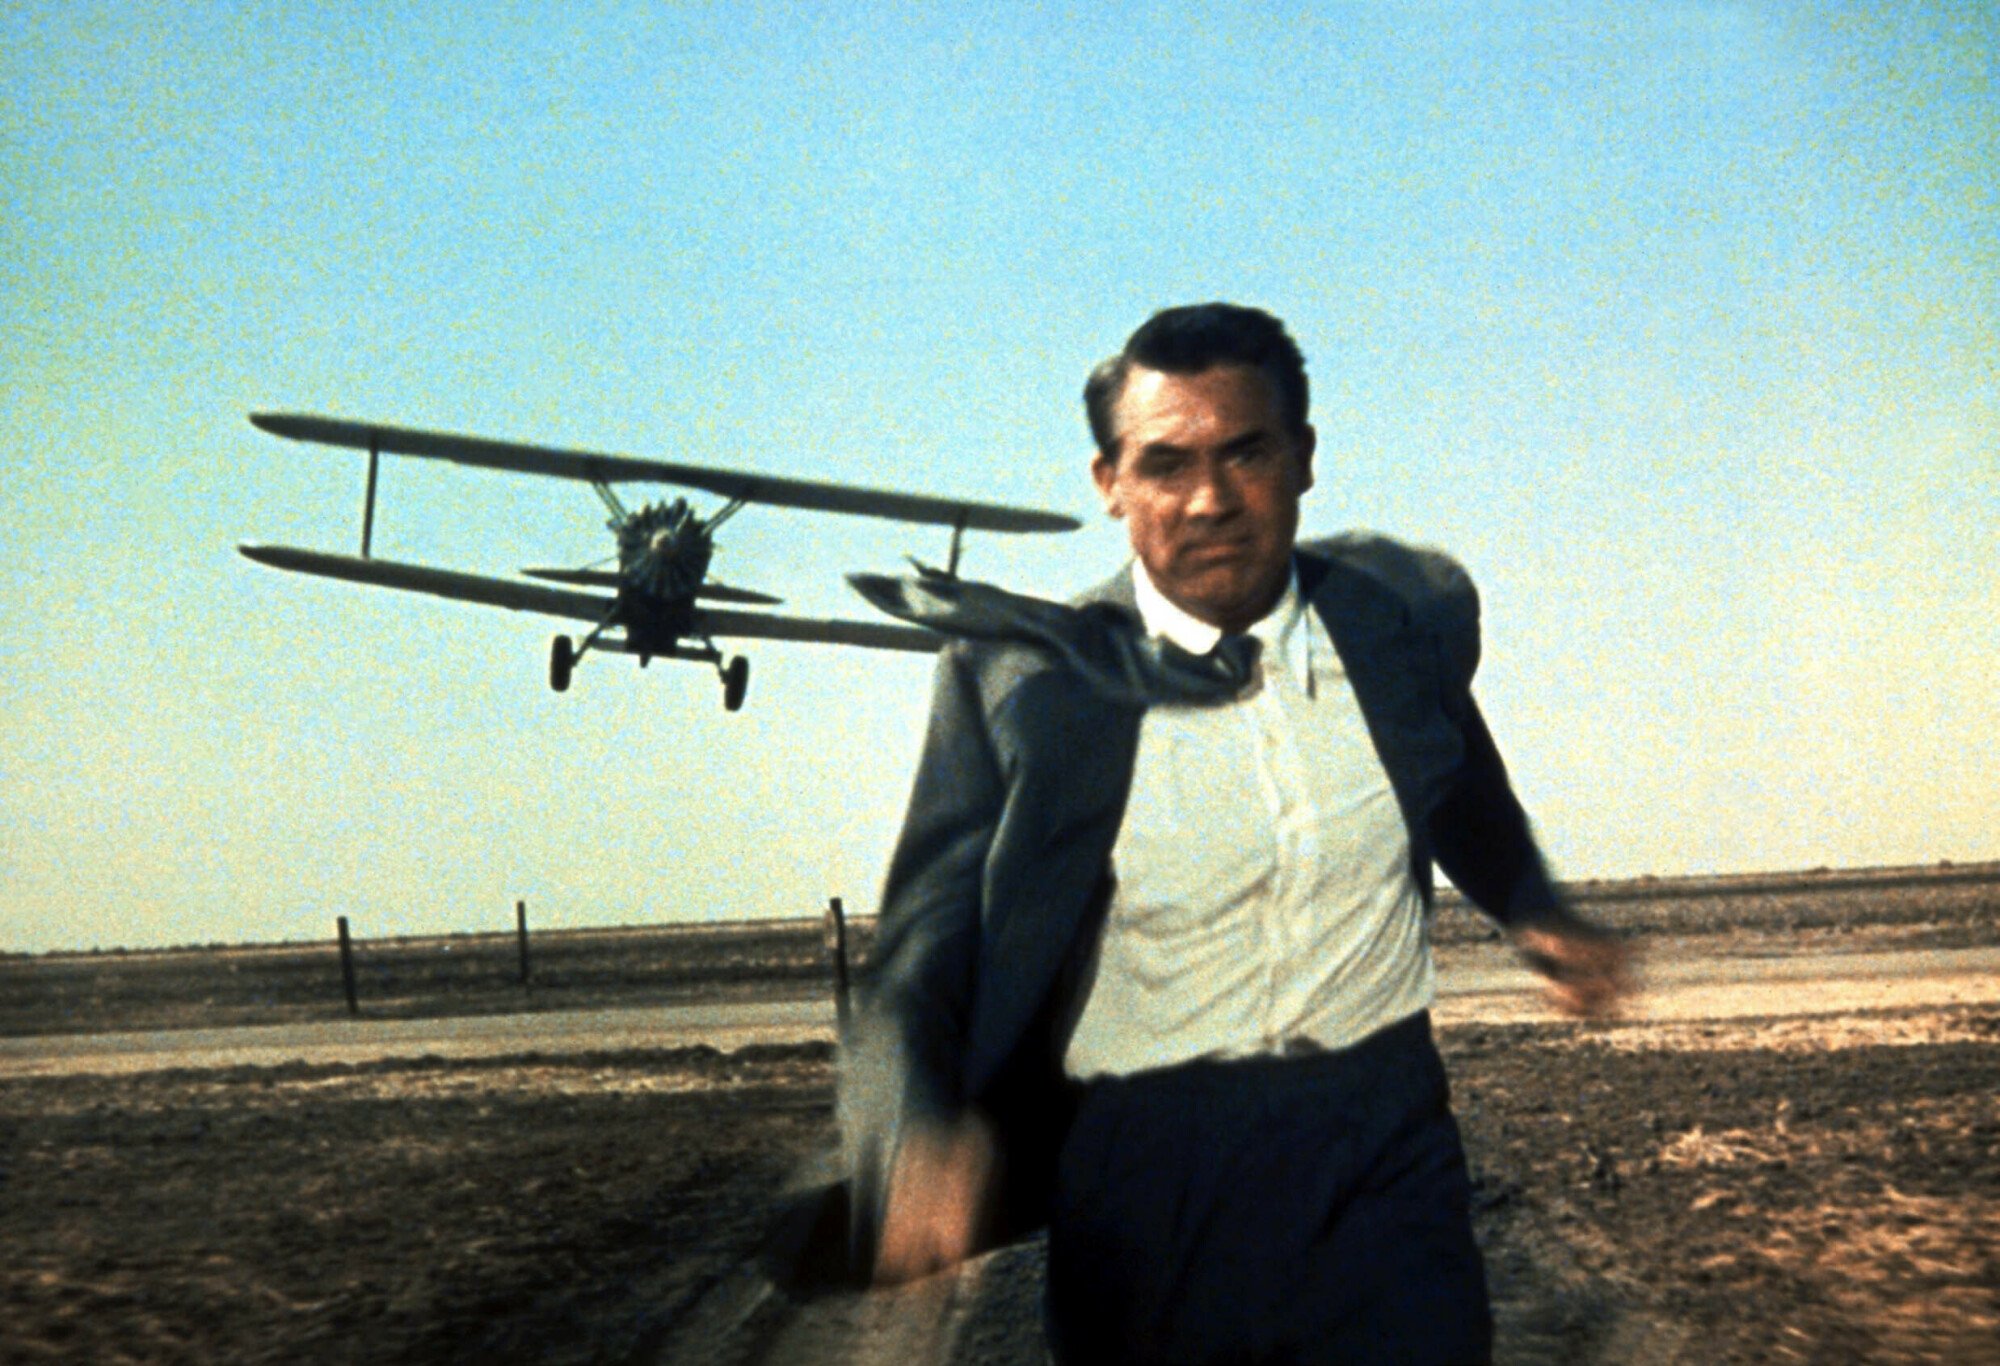 Cary Grant runs from an airplane in "North by Northwest."